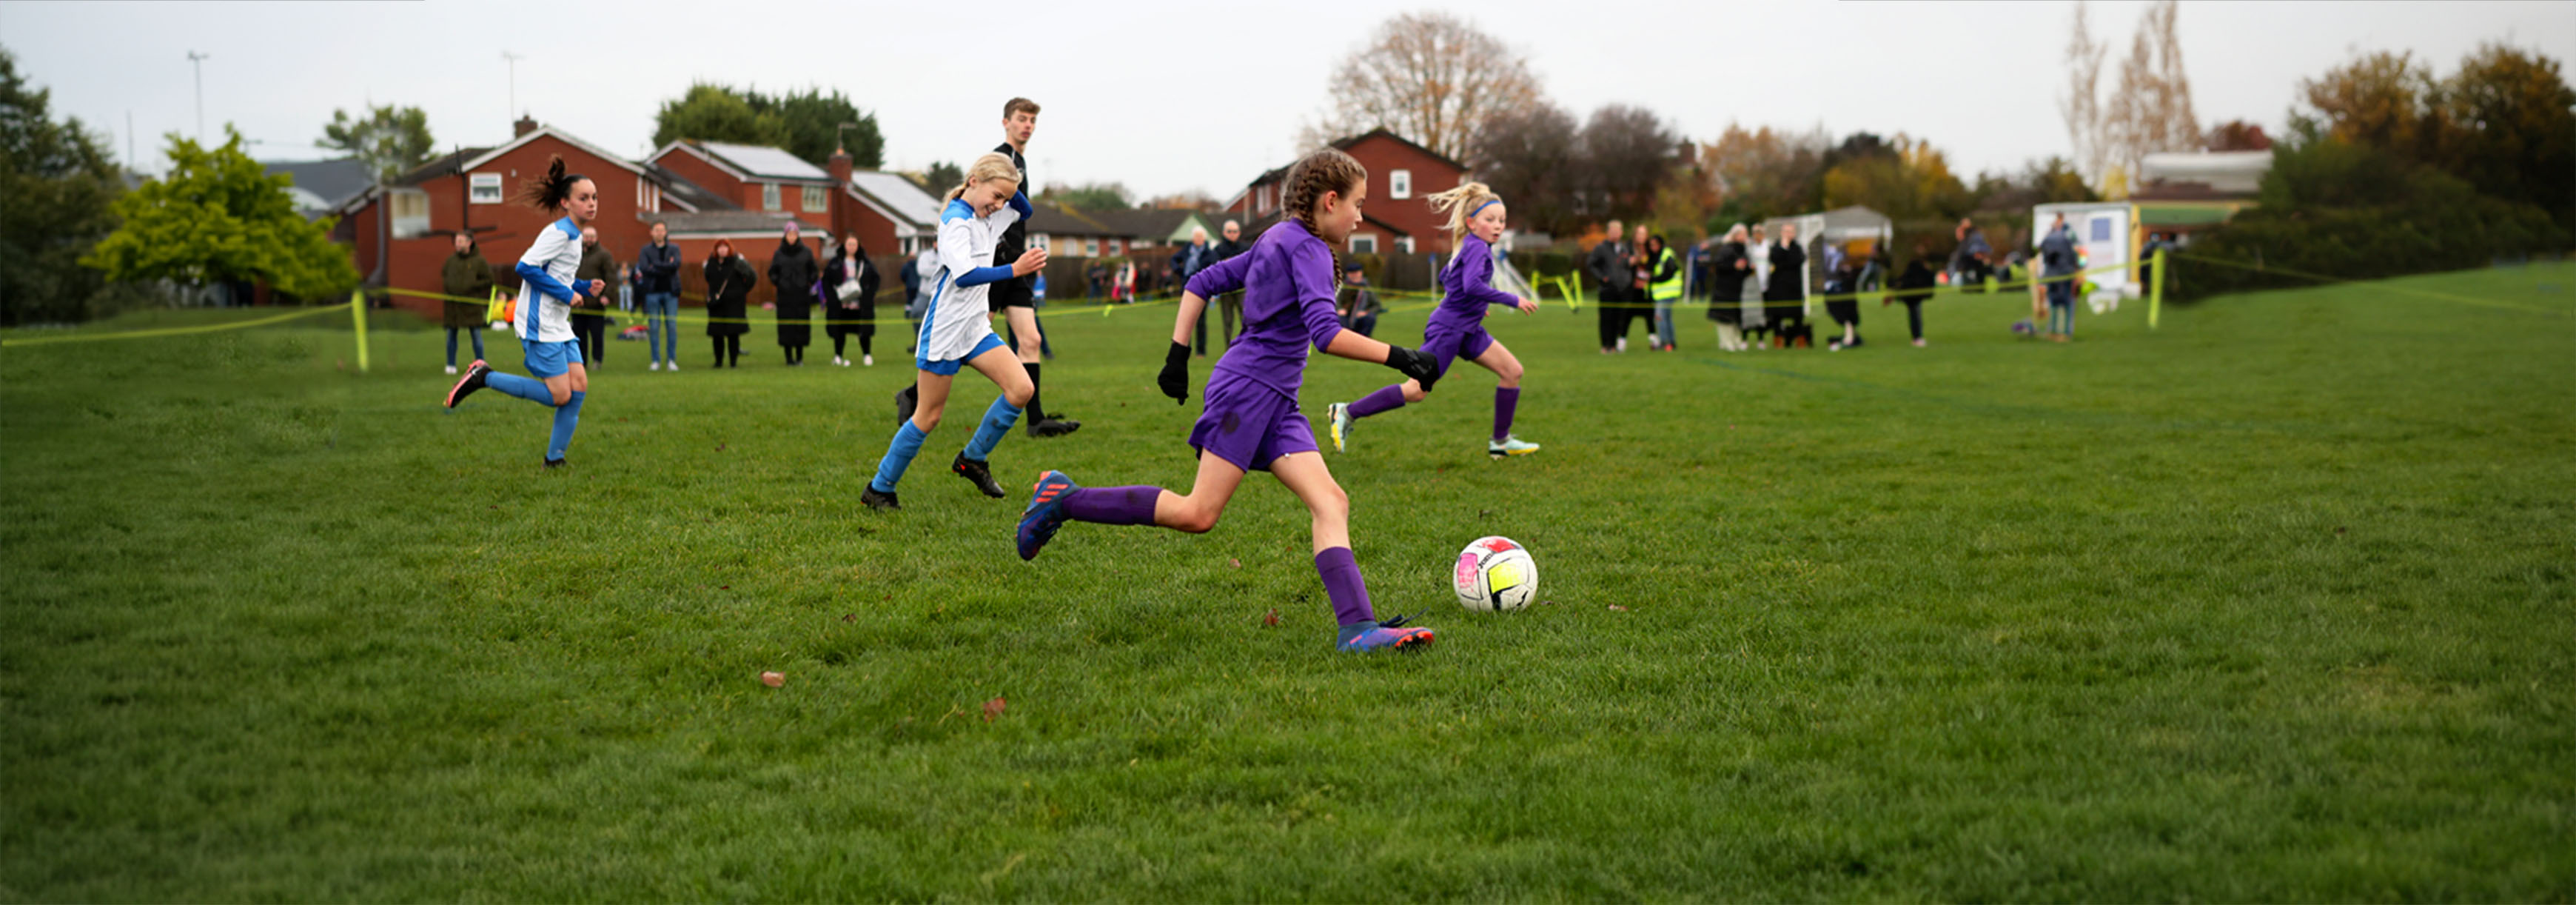 A young girl runs forward with the ball during a grassroots football match on a grass pitch.